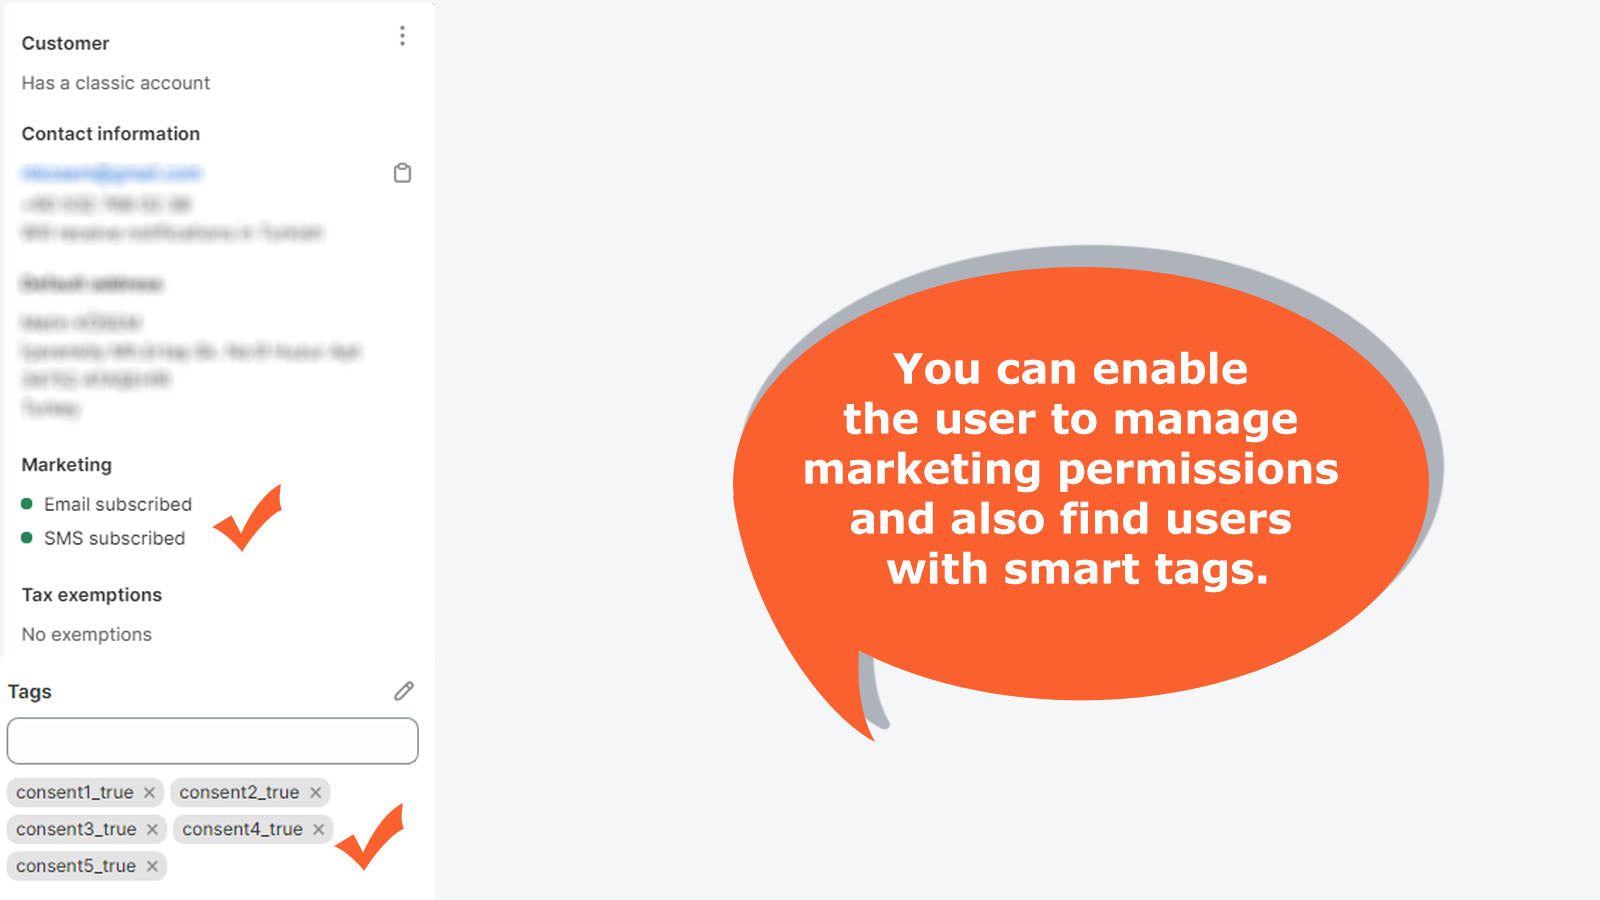 You can enable the user to manage marketing permissions